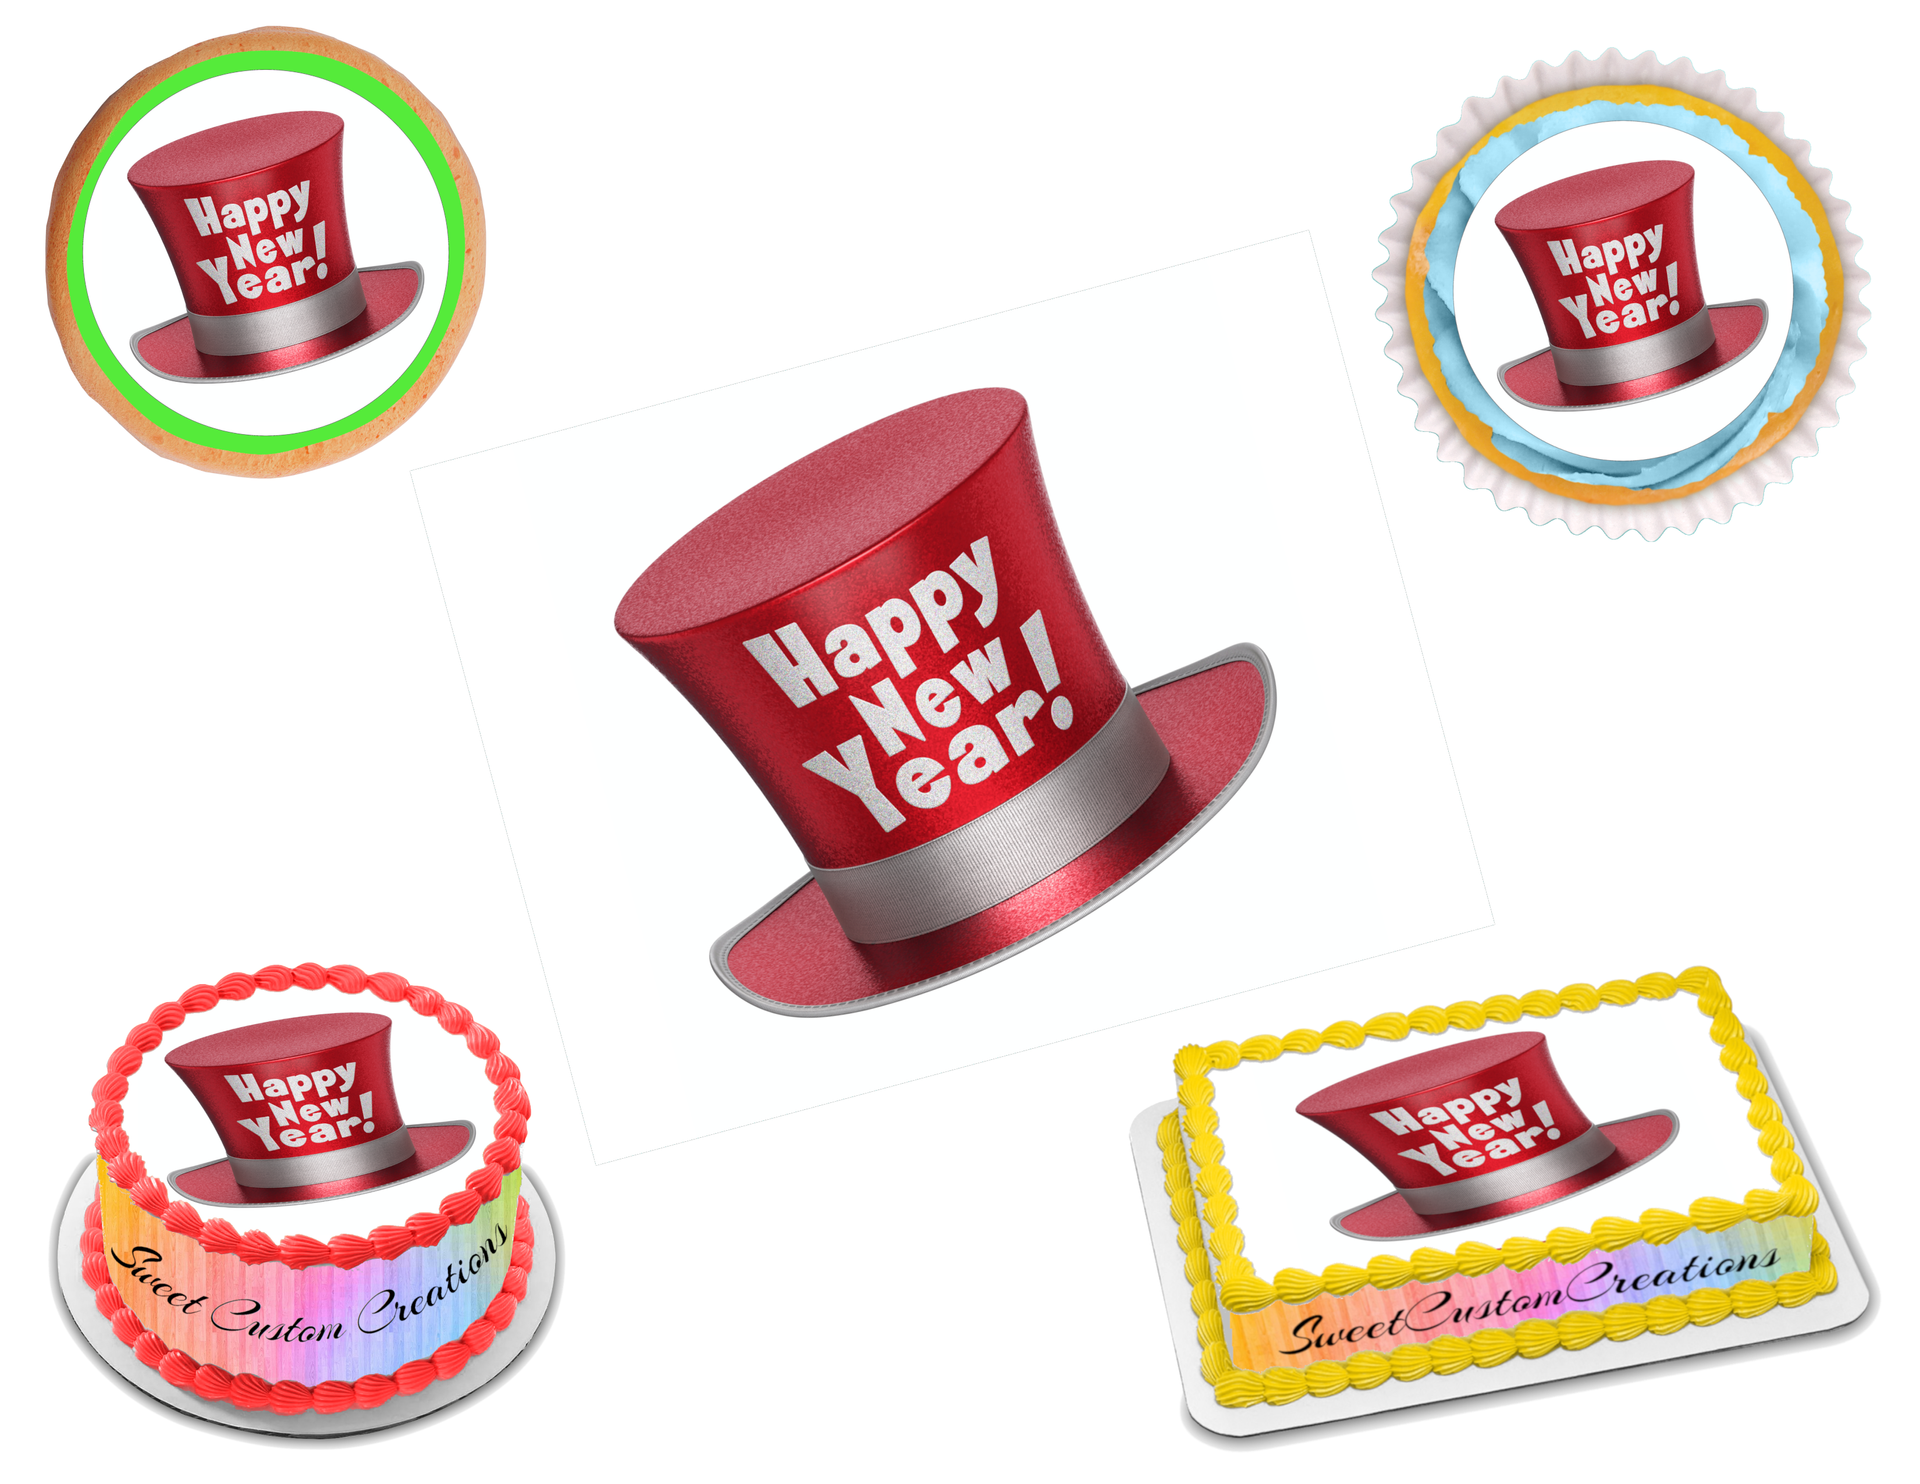 Happy new year edible image frosting sheet topper sizes â sweet custom creations